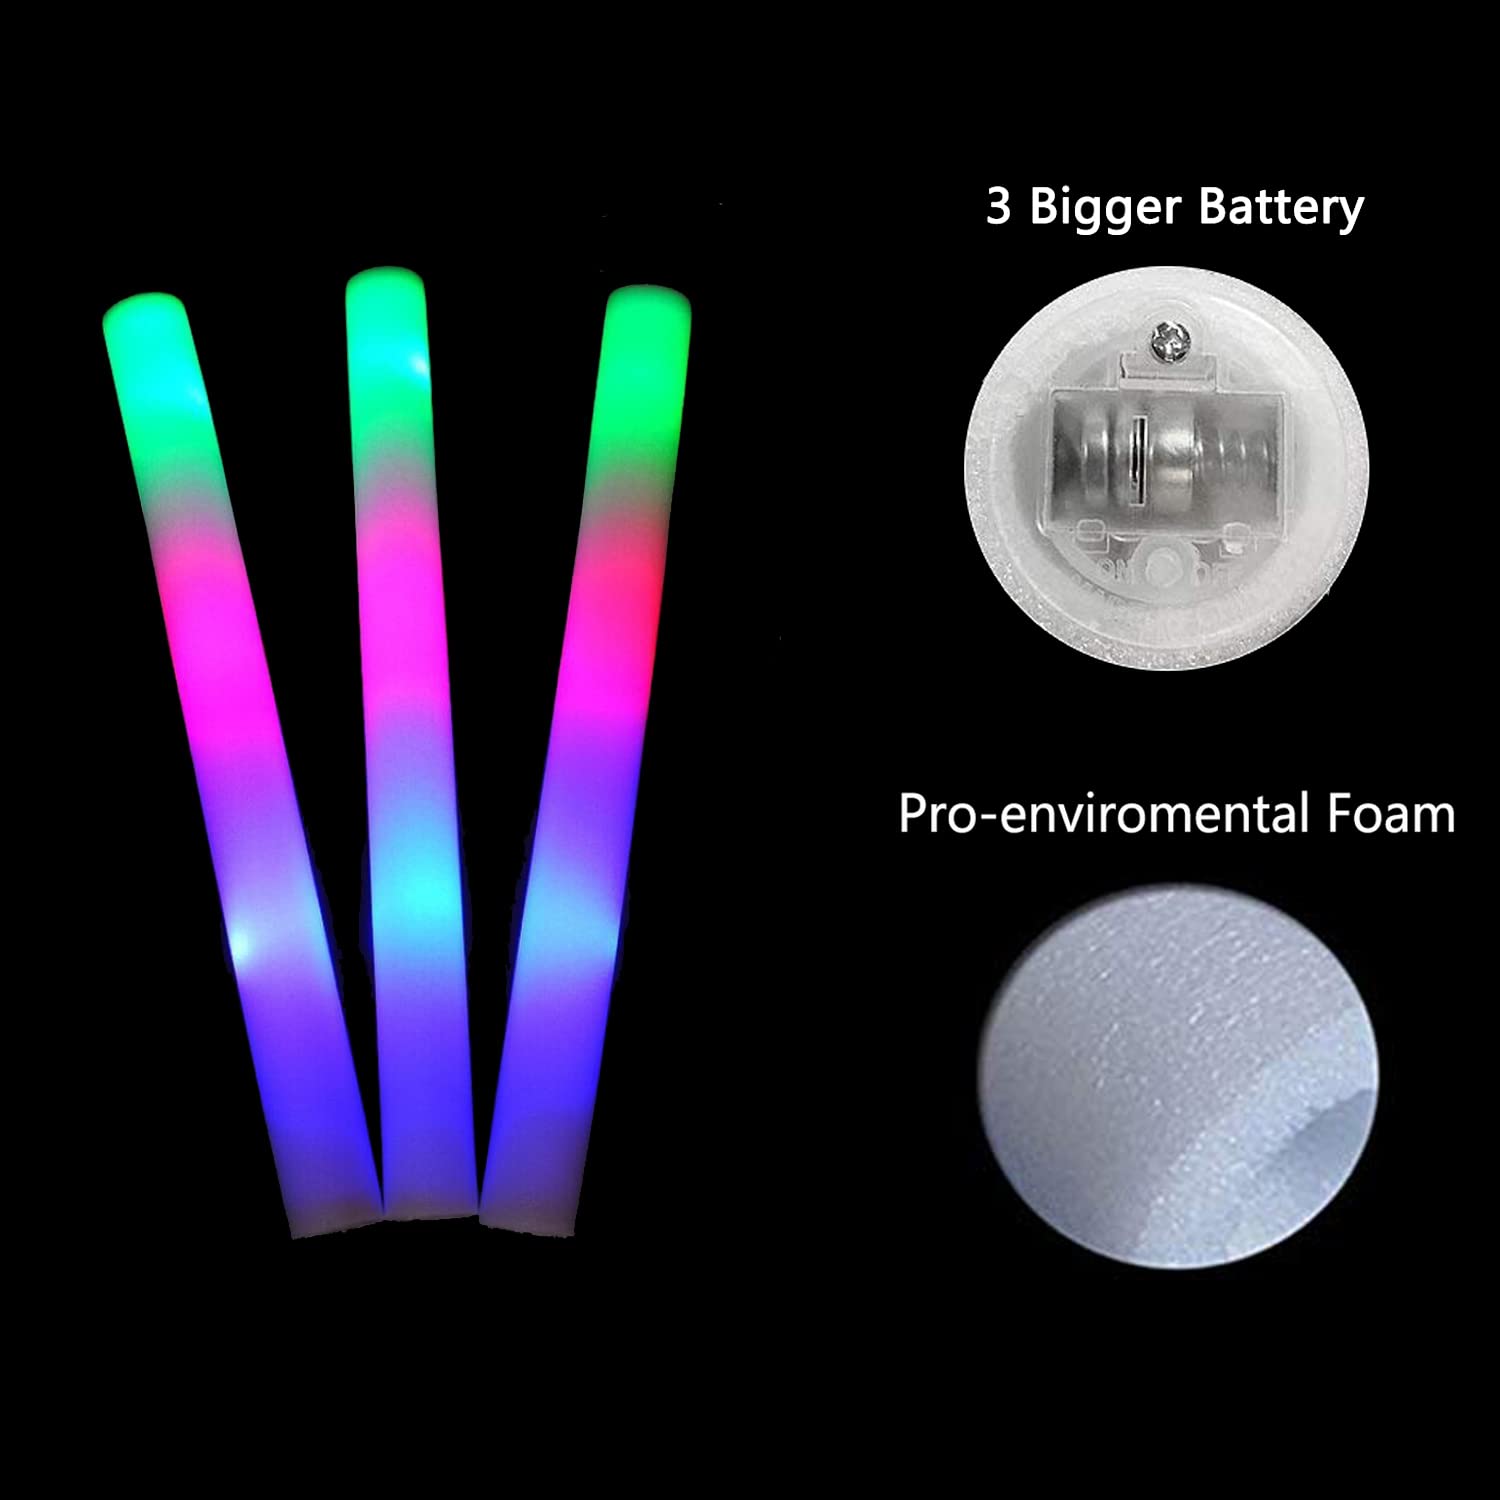 Foam Glow Sticks-52PCS LED Light Up Foam Sticks with 3 Modes Flashing,Glow in The Dark Party Supplies for Halloween Birthday Wedding Pool Concert and Event,A Hit As Party Favors for Kids Adults